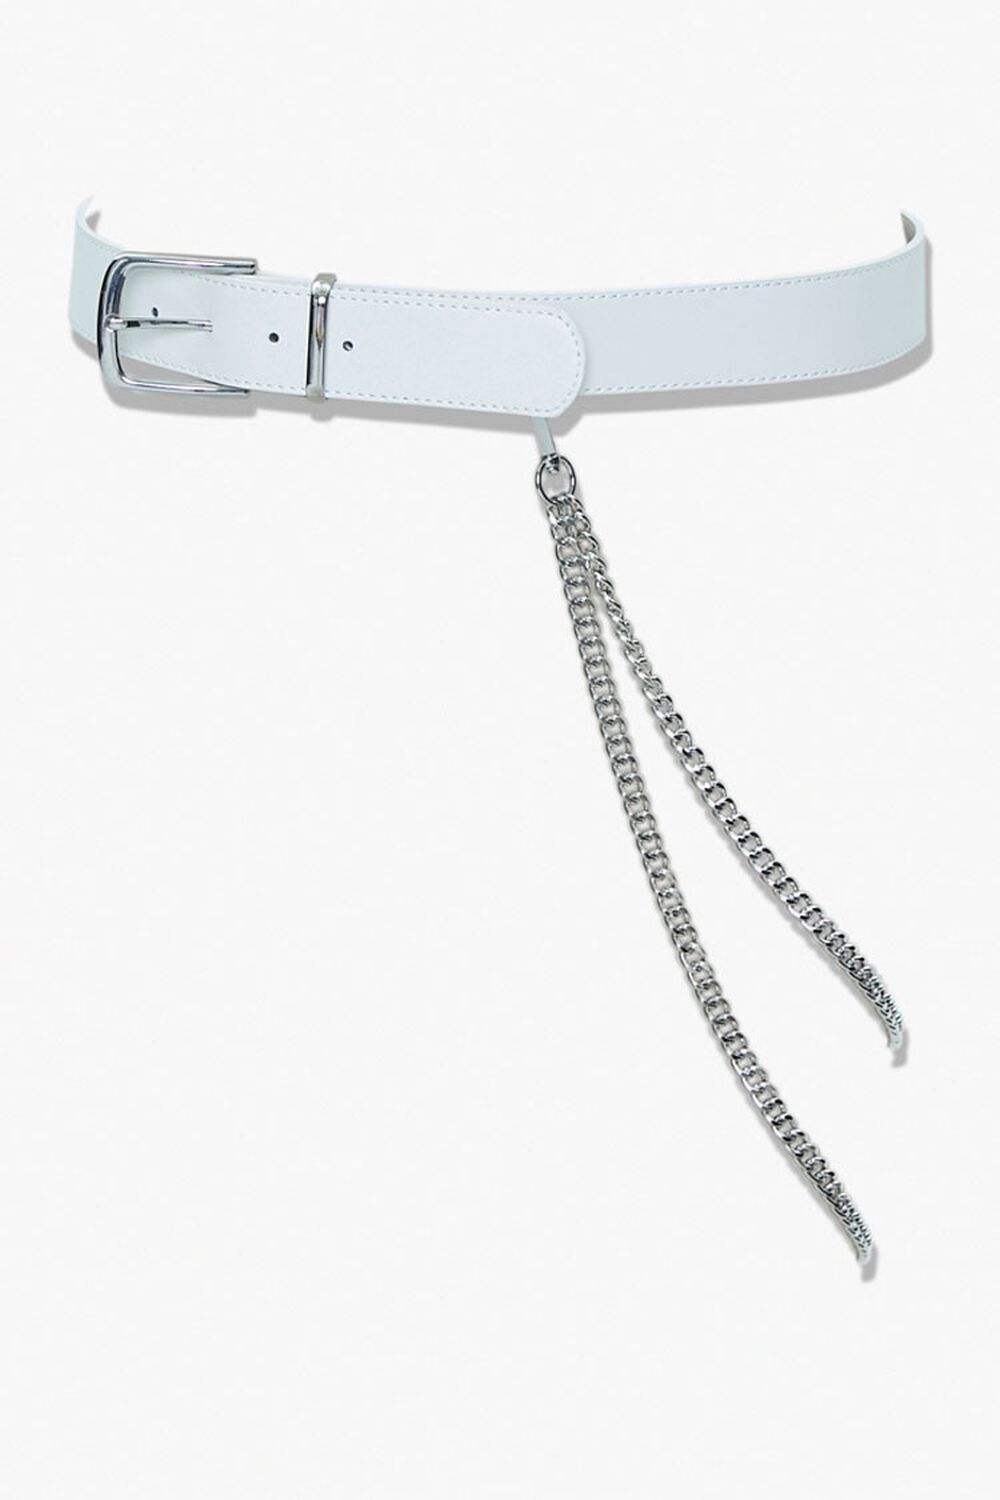 WHITE Layered Wallet Chain Belt, image 1